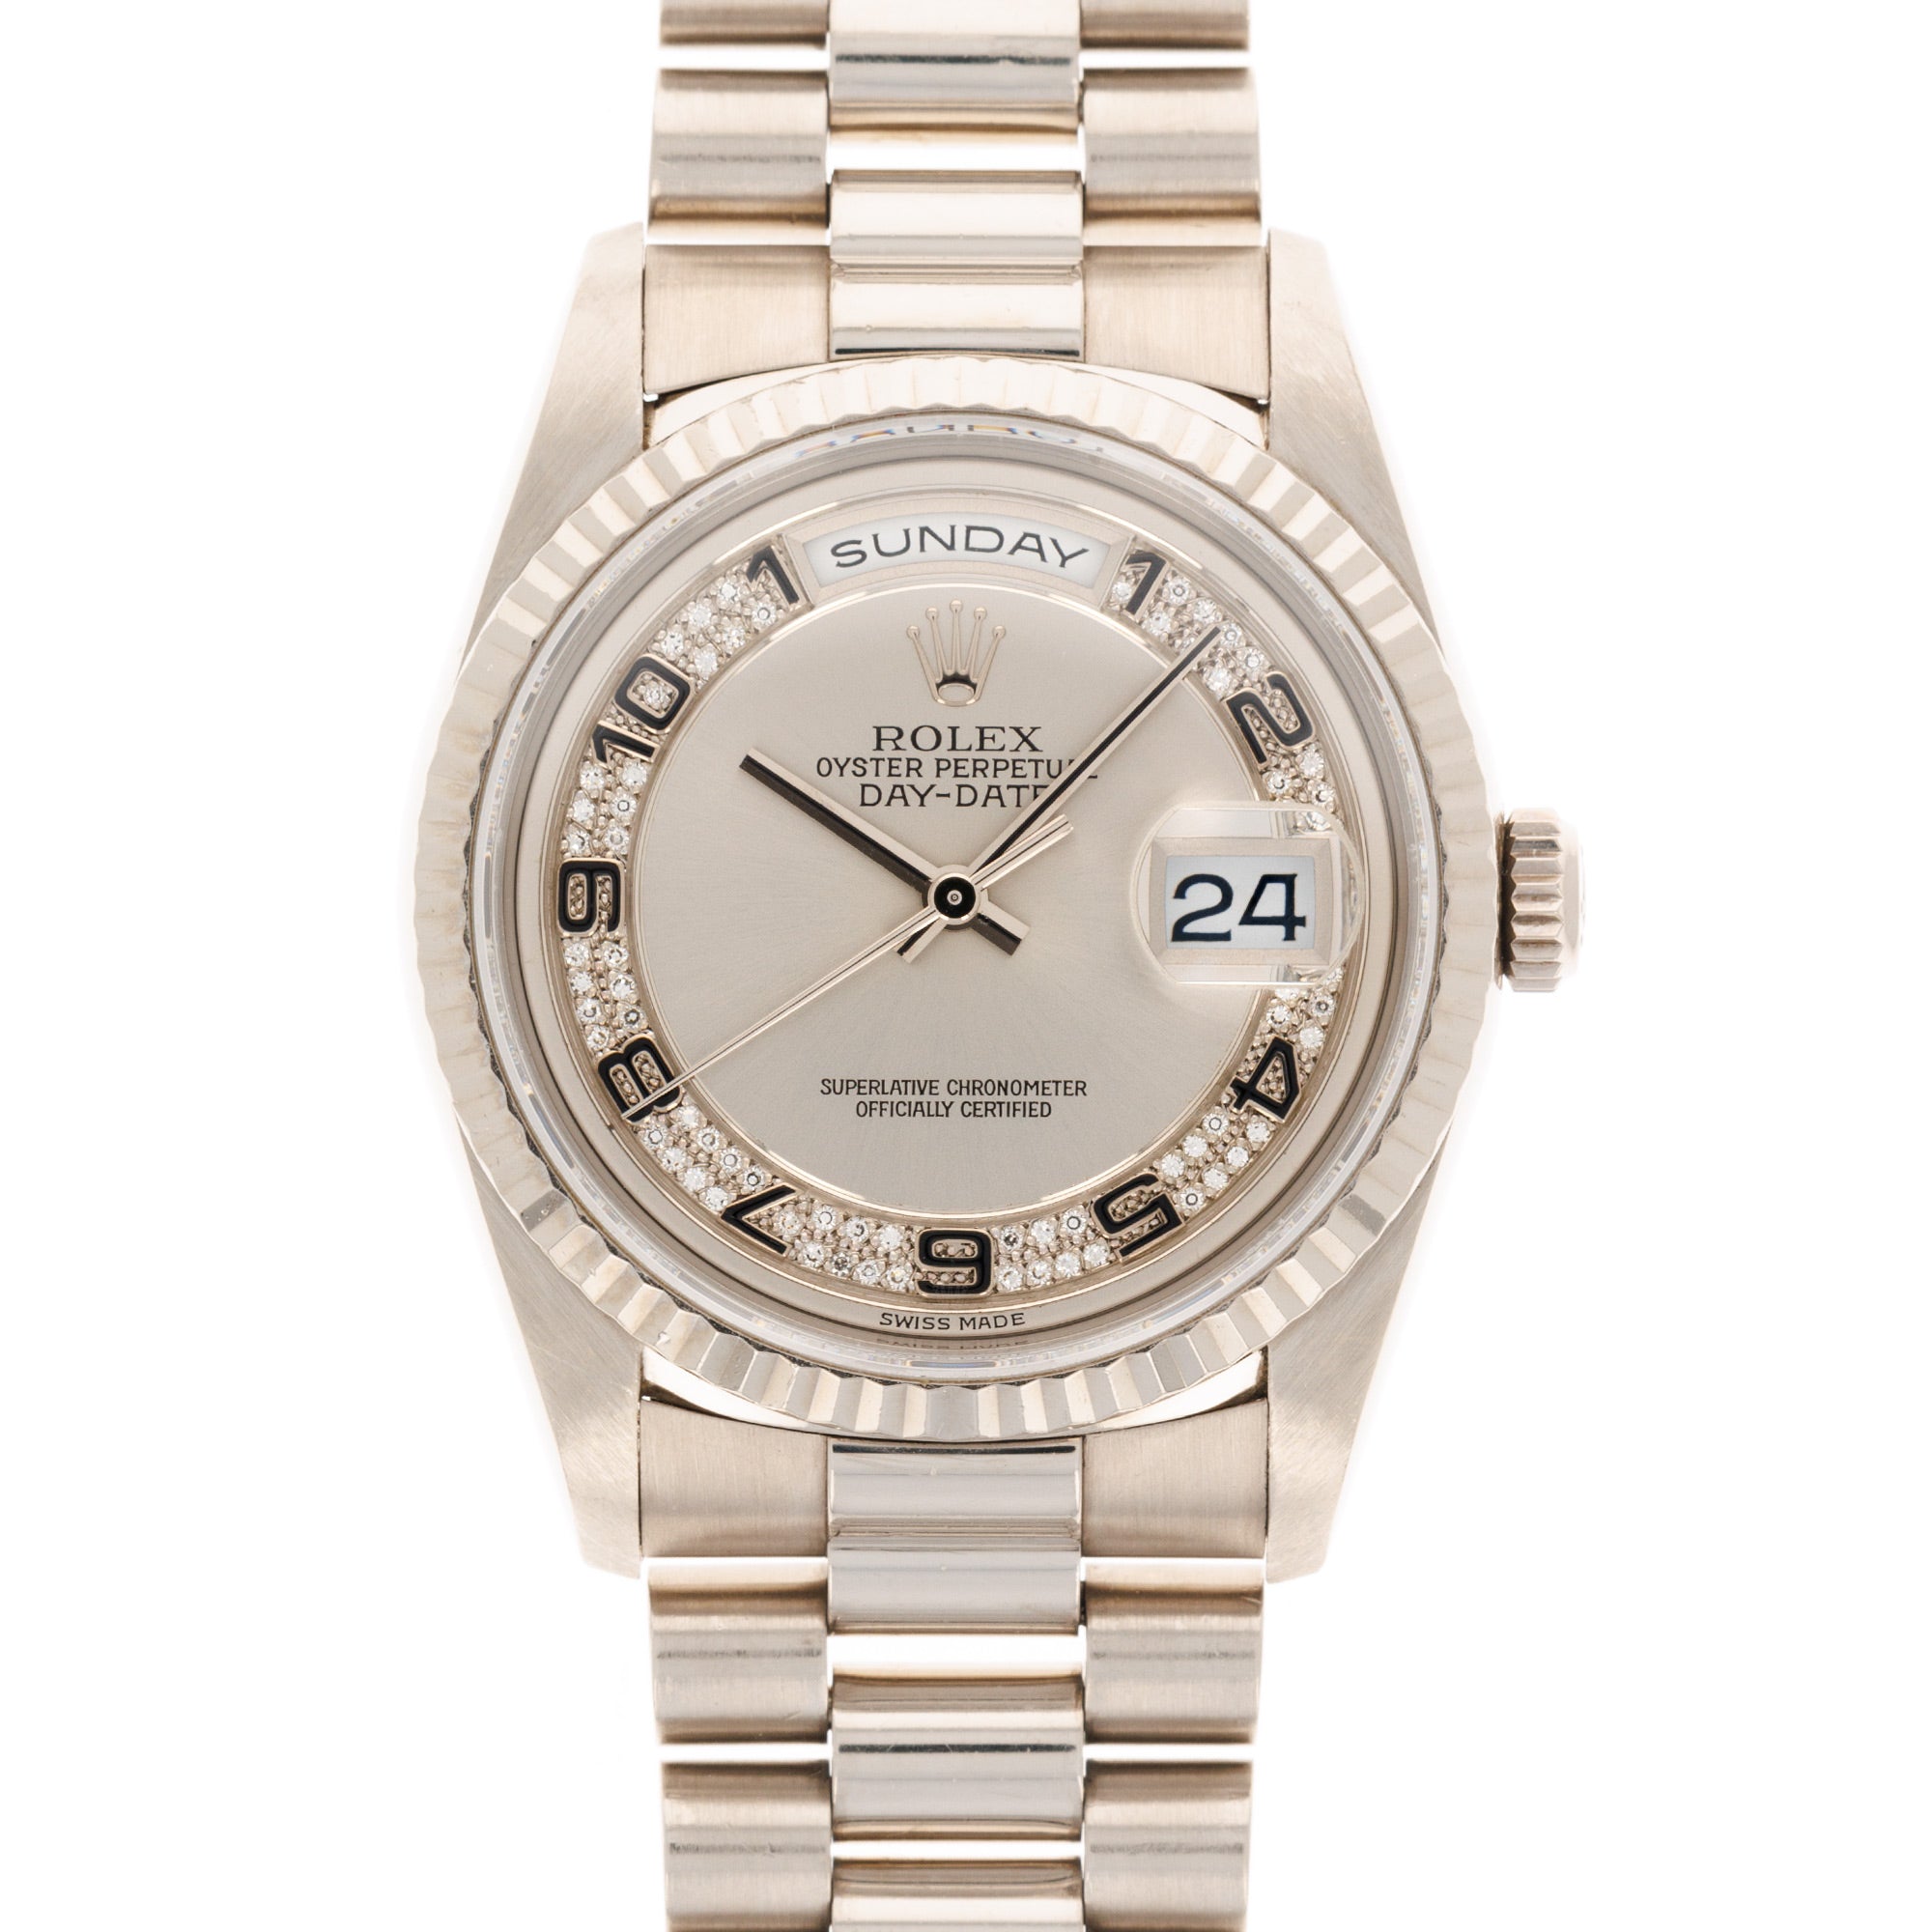 Rolex - Rolex White Gold Day Date Ref. 18239 with Factory Diamond Dial - The Keystone Watches